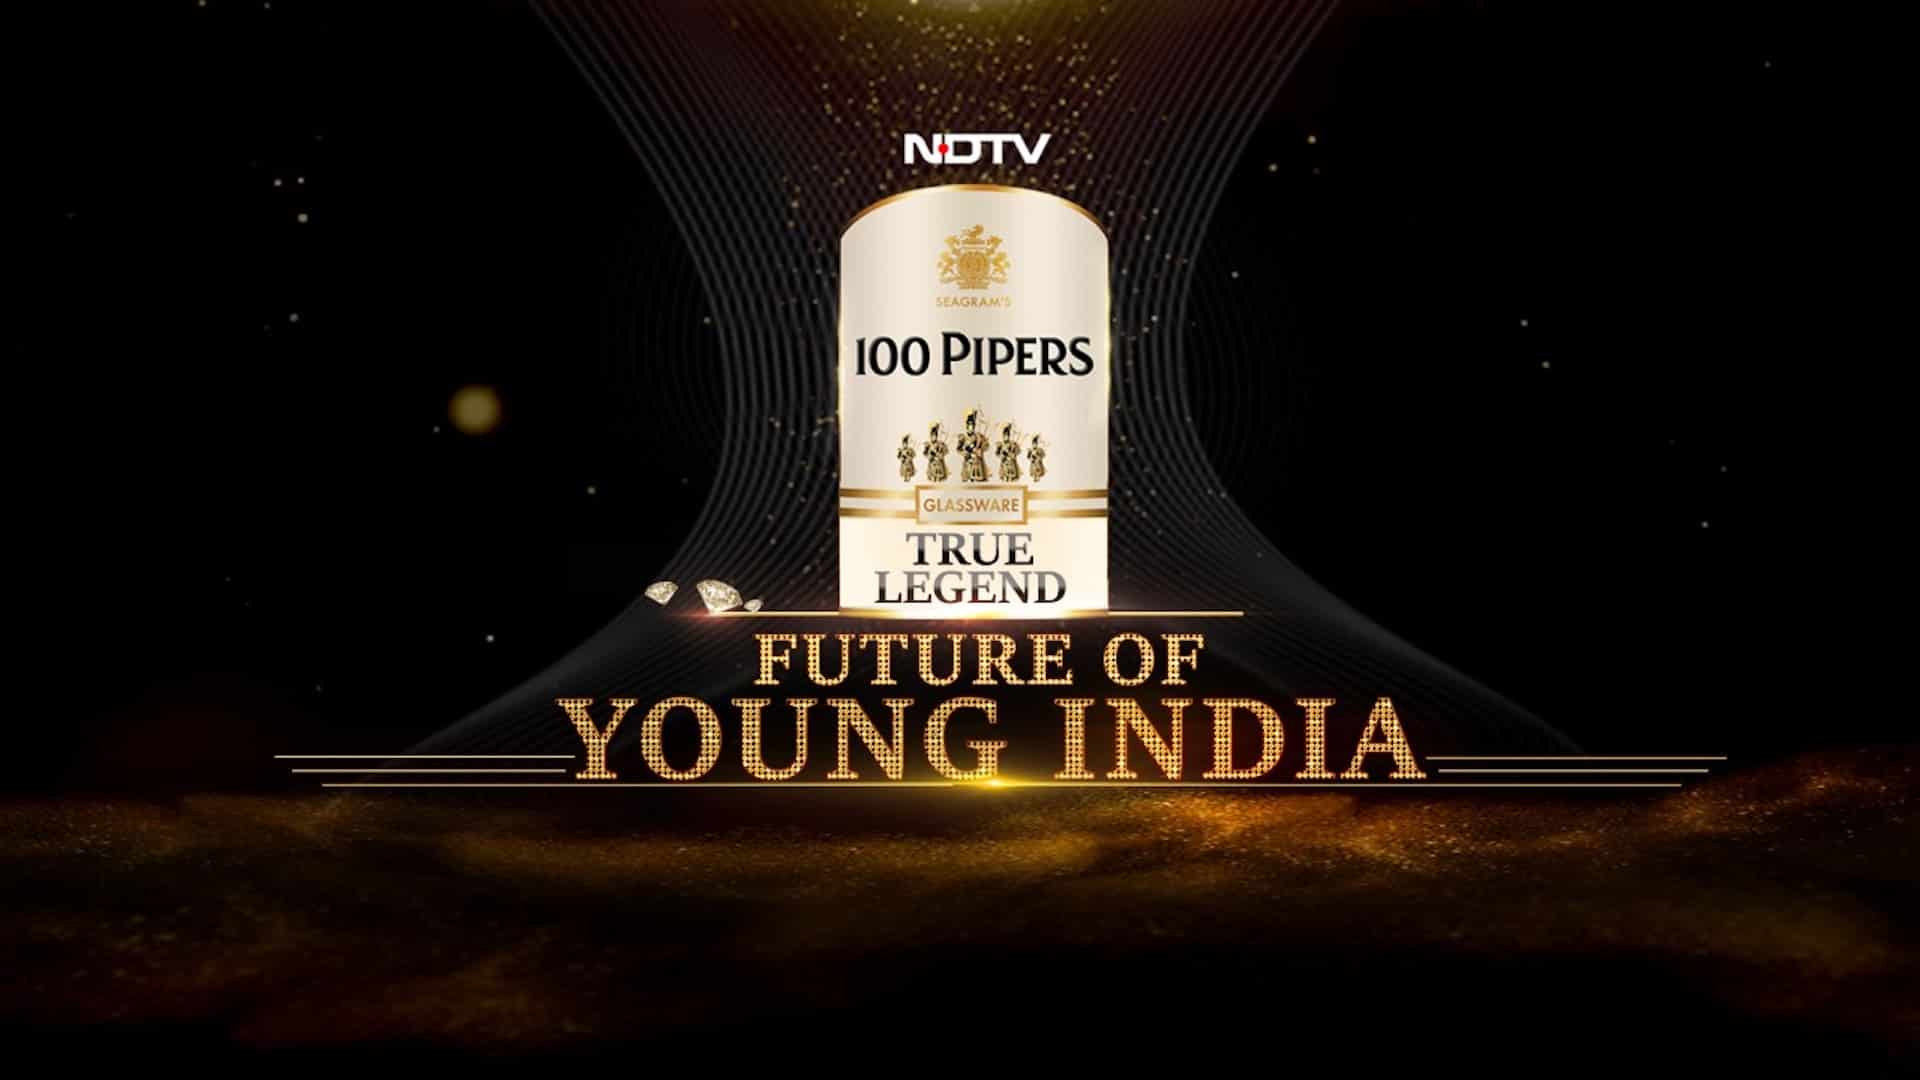 NDTV Partners With 100 Pipers Glassware to celebrate Indian Legends